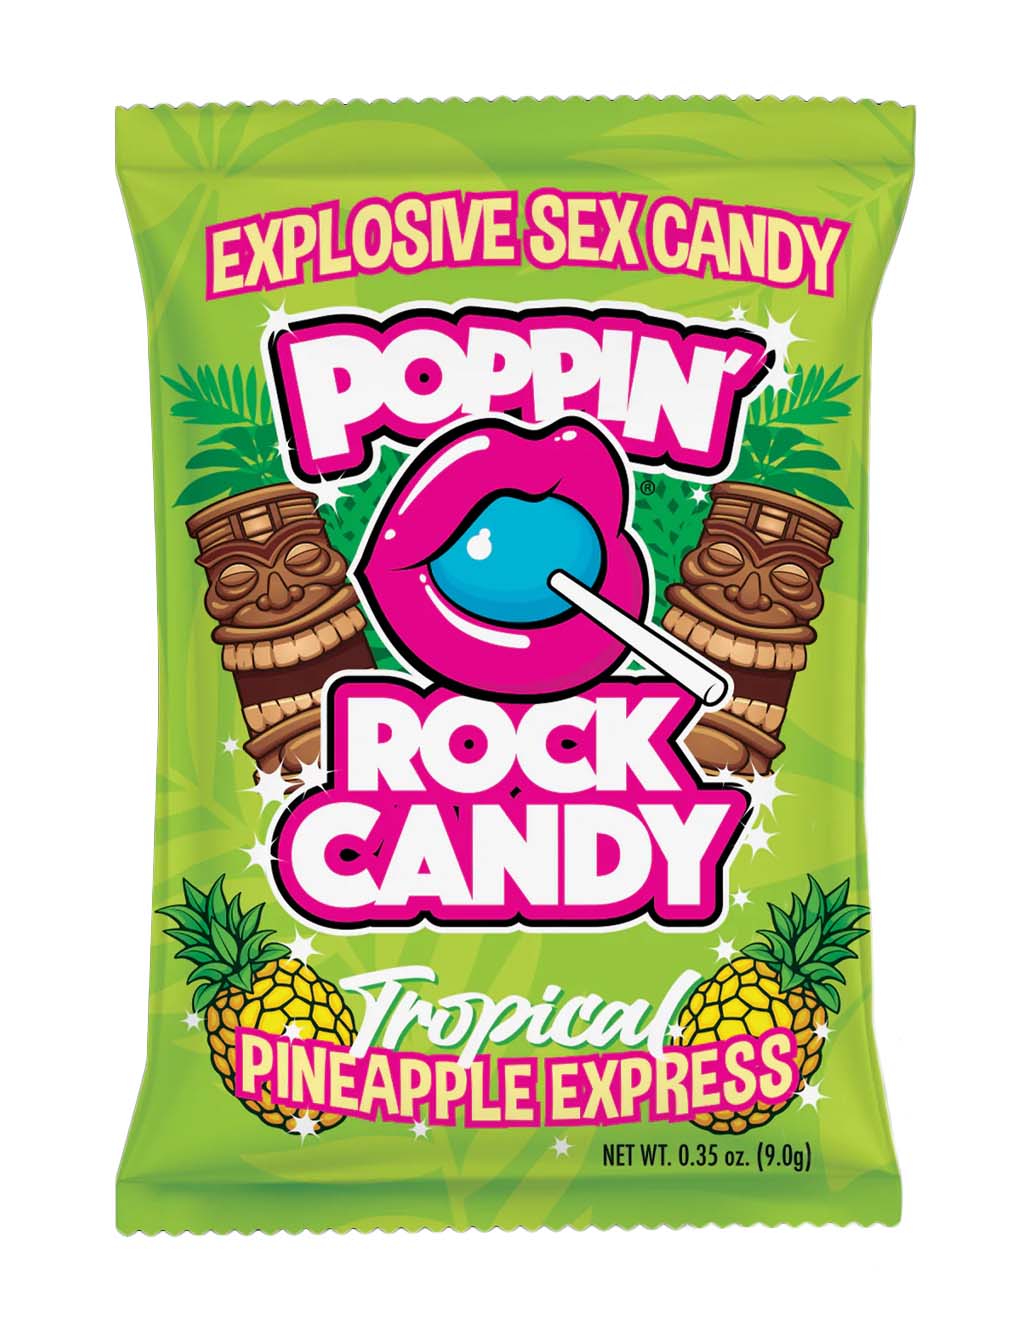 Rock Candy Popping Rock BJ Candy- Pineapple xpress